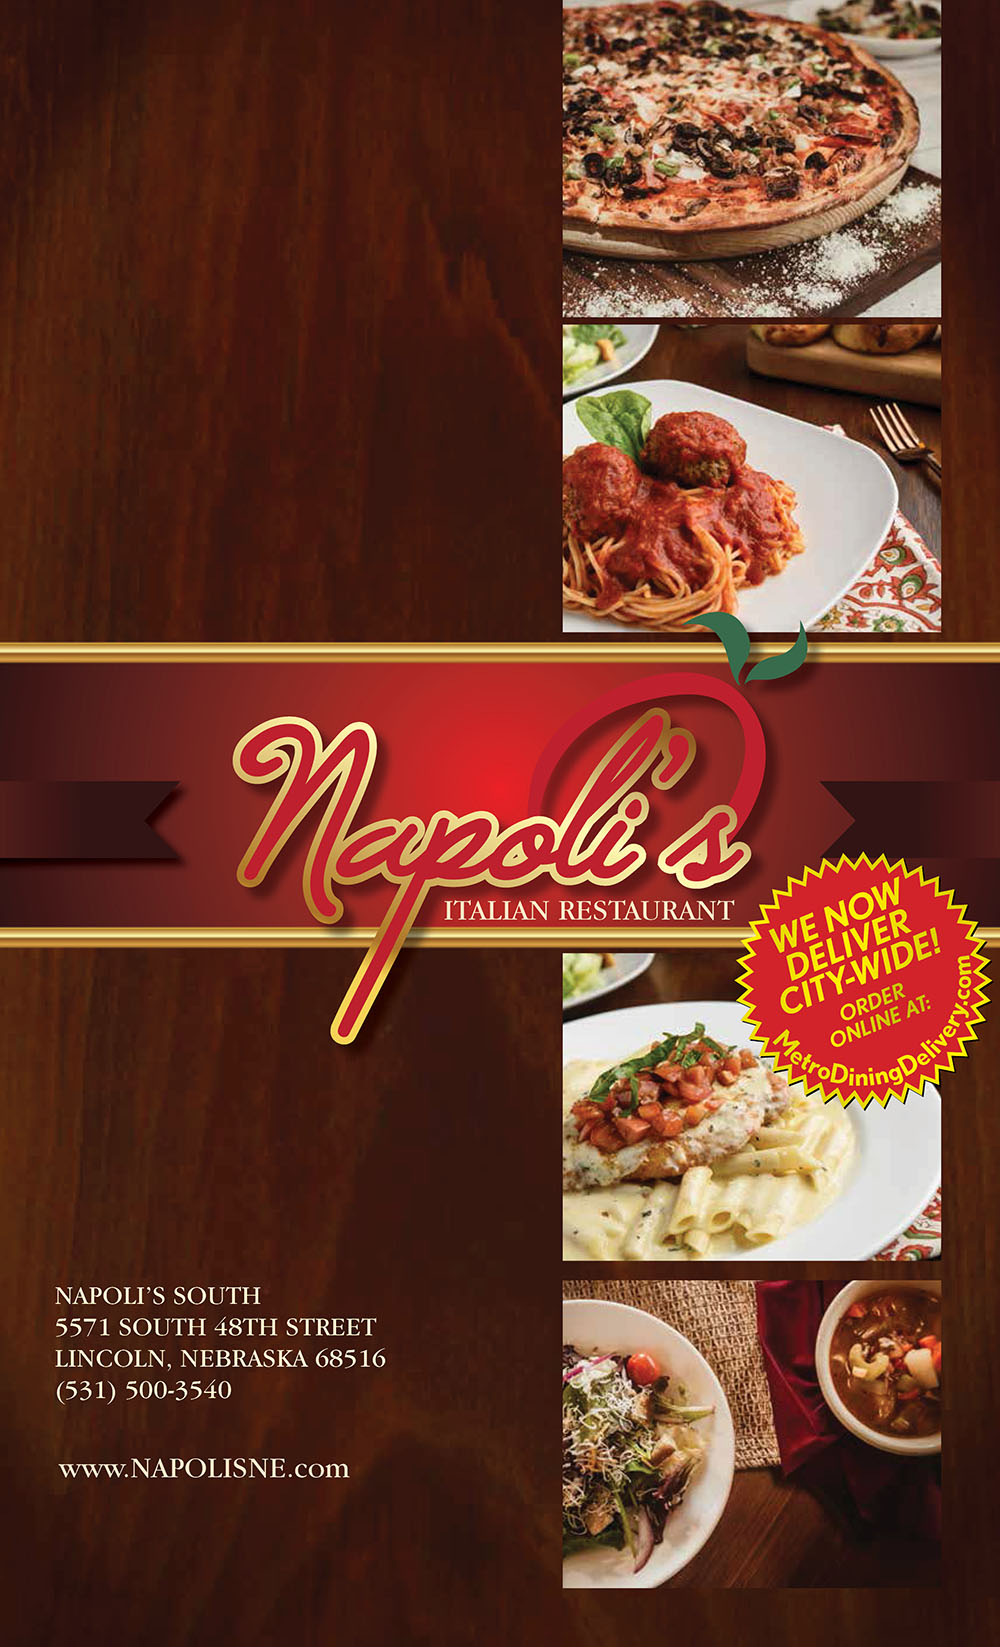 
Napoli's
ITALIAN RESTAURANT
5571 S 48TH STREET
LINCOLN, NEBRASKA 68516
(531) 500-3540
www.NAPOLISNE.com

5571 S 48TH STREET
LINCOLN, NEBRASKA 68516
(531) 500-3540
3421 CONESTOGA DRIVE
GRAND ISLAND, NE 68803
(308) 675-1771
www.NAPOLISNE.com
ITALIAN RESTAURANT
BAKED PASTAS
Substitute Alfredo or Alla Panna Sauce in place of the Marinara Sauce for 1.99, or add meat sauce for 2.99
All entrées served with soup or salad and fresh rolls with dipping oil.
HOUSE PASTAS
SALADS & SOUP
Substitute Alfredo or Alla Panna sauce for only 1.99.
Spaghetti “The Works”
This one has it all! Spaghetti pasta loaded with meatballs,
meat sauce, mushrooms and sausage 14.99
Spaghetti Your Way
Your choice of butter, marinara sauce, or olive oil, garlic
and basil 10.99, or add meatballs or sausage for 1.99,
add mushrooms for .99, substitute meat sauce for .99
Tortellini Alla Panna
Cooked cheese tortellini sautéed in alla panna
sauce 12.99 Add chicken 3.99 Add shrimp 6.99
Sausage Pizolla
Italian sausage sautéed with fresh mushrooms, onion,
green peppers and marinara sauce over spaghetti 13.99
Tortellini Sicilian
Cooked cheese tortellini sautéed with ham and
black olives in a rich alla panna sauce 12.99
Add chicken 3.99 Add shrimp 6.99
Spaghetti Carbonara
Fresh tomatoes, mushrooms and ham sautéed in a rich
cream sauce and served over spaghetti 12.99
House Fettuccine Alfredo
Fresh, white wine and heavy cream sauce over
fettuccine 11.99, with grilled chicken 14.99,
with shrimp 16.99, add broccoli for only 2.99
Pasta Primavera
Our take on this favorite with fresh mixed
vegetables sautéed in alla panna sauce and served over
fettuccine 12.99 with grilled chicken 14.99
Napoli’s Salad
Fresh greens topped with black olives, mushrooms
and mozzarella and tomatoes 8.99
with chicken 11.99, with shrimp 14.99
Caesar Salad
Hearty Romaine lettuce tossed with Caesar dressing and
croutons 8.99 with chicken 11.99, with shrimp 14.99
Greek Salad
Fresh greens mixed with black olives, feta cheese,
tomatoes, and red peppers 8.99
with chicken 11.99, with shrimp 14.99
Antipasto Salad
Fresh greens mixed with ham, black olives and
mozzarella cheese 9.99
SAUCES & SIDES
A dozen rolls 7.99 • Half-dozen rolls 4.99
Alfredo Sauce 3.99 • Alla Panna Sauce 3.99 • Olive oil, garlic and fresh basil 2.99
Marinara Sauce 2.29 • Meat Sauce 3.99 • Side of Meatballs or Sausage 4.99
Side of Grilled Chicken 3.99 • Side of Breaded Chicken 4.29 • Side of Grilled Shrimp 9.99
Side House Salad 4.99 • Side Greek Salad 4.99 • Side Dressing 1.29
Manicotti
Pasta stuffed and rolled with ricotta cheese, topped with marinara sauce and mozzarella cheese 11.49
Spinach Ravioli
Jumbo raviolis stuffed with spinach and ricotta cheese, topped with marinara sauce
and mozzarella cheese 12.49
Tour of Italy
Lasagna, manicotti and breaded chicken baked in alla panna sauce and topped with mozzrella 14.99
Pasta Combo
Lasagna, manicotti, ravioli, cheese tortellini and Italian sausage topped
with marinara and mozzarella 12.99
Eggplant Parmigiana
Breaded eggplant topped with marinara and mozzarella cheese 11.49 Add a side of spaghetti 2.99
Napoli’s Lasagna
Pasta layered with beef and mozzarella, topped with marinara and mozzarella 12.49
Pasta Sampler
A sampling of Ravioli, Lasagna, and Manicotti baked together and topped
with marinara sauce and melted mozzarella cheese 11.99
*Consuming raw or undercooked meats, poultry, seafood, shellfish or eggs may increase your risk of
foodborne illness, especially if you have certain medical conditions.
NAPOLI’S SPECIALTIES
All entrées served with soup or salad and fresh rolls with dipping oil.
All entrées served with soup or salad and fresh rolls with dipping oil.
All entrées served with soup or salad and fresh rolls with dipping oil.
Damabianka
Sautéed mushrooms in a rich brandy cream sauce served
over spaghetti with chicken 14.99 with veal 16.99
Chicken Pomodoro
Tender chicken breast sautéed with fresh tomatoes, basil
and garlic in a light sherry wine based marinara sauce,
and served over fettuccine pasta 15.99
Carsoni
Sautéed with fresh mushrooms and broccoli
in a rich pesto cream sauce over spaghetti
with chicken 14.99, with veal 16.99
Veal or Chicken Parmigiana
Lightly breaded and topped with marinara and
mozzarella cheese. Served over spaghetti
with chicken 14.99, with veal 16.99
Steak Marsala
A 12-ounce ribeye cooked to your liking and sautéed
with mushrooms, in a Marsala wine sauce,
served with a baked potato 22.99
Fettuccine Tutto del Mare
Mussels, shrimp, scallops, calamari and baby clams
sautéed in white wine garlic lemon butter sauce,
served over fettuccine pasta 22.99
Shrimp Scampi
Half dozen jumbo shrimp sautéed sautéed
in white wine garlic lemon butter sauce.
Served over linguine pasta 17.99
Fettuccine with White Or Red Clam Sauce
Baby clams sautéed in a white wine sauce or with
marinara sauce, served over fettuccine pasta 14.99
Steak Pizzola
A 12-ounce ribeye with sautéed fresh mushrooms,
onions, green peppers and marinara sauce.
Served with a side of spaghetti 21.99
Ribeye Steak
A 12-ounce ribeye served with a side of fresh broccoli,
potatoes and mushroom sauce 21.99
Steak Napoli’s
A 12-ounce ribeye with sautéed fresh basil,
shrimp and tomatoes in a basil cream sauce.
Served with a side of spaghetti 24.99
Salmon Creamore
Sautéed with fresh mushrooms, roasted red peppers
in a cream sauce, served over spaghetti 18.99
Salmon Palermo
Sautéed with fresh broccoli, tomatoes and spinach
in a garlic lemon butter sauce, over spaghetti 18.99
Seafood Alfredo
Sautéed shrimp, clams, mussels and scallops in
an alfredo sauce, served over fettuccine 19.99
Shrimp Scaloppini
Shrimp, scallops, mussels and clams sautéed in
olive oil, garlic and basil over fettuccine, topped
with sherry wine marinara 19.99
Lobster Ravioli
A hearty portion of ravioli filled with lobster
and simmered in alla panna sauce 18.99
Ravioli alla Pesto with Shrimp
Jumbo ravioli sauteéd with shrimp, spinach and
pesto sauce 18.99
CHICKEN & VEAL
STEAKS & SEAFOOD
Dorian’s Special
Chicken breast sautéed with broccoli, spinach and tomatoes in a garlic white wine
or Alfredo sauce, served over tortellini pasta 15.99
Napoli’s Special
Chicken and sausage sautéed with roasted bell peppers, ham and black olives in a
rich, white wine cream sauce with a touch of marinara. Served over spaghetti 16.99
Tony’s Special
Chicken breast sautéed in a spicy dish of red peppers, mushrooms, onions and garlic
in a sherry wine Alfredo sauce with a touch of marinara. Served over spaghetti 15.99
Besi’s Special
Sautéed shrimp, chicken, broccoli, mushrooms, tomatoes topped with mozzarella cheese over
penne pasta in white wine lemon butter sauce and fresh garlic and basil 19.99
Chicken Cacciatore
Chicken breast sautéed with mushrooms, onions and peppers.
Served with marinara sauce over spaghetti 15.99
PIZZA
Pizza Your Way!
Start with a premium cheese pizza with your prefered
sauce, then add your favorite topping until you have
the pizza of your dreams. 12” 9.99 16” 12.99
Sauce It Up! Pizza Sauce, Garlic and Extra Virgin
Olive Oil, Bianca or Sweet Baby Ray’s BBQ
Add Your Favorite Premium Topping:
Pepperoni, Sausage, Ground Beef, Canadian Bacon,
Sliced Sausage, Meatballs, Grilled Chicken or
Sliced Steak, 1.79/2.29 each
Add Your Veggies: Mushrooms, Onions,
Jalapeños, Green Peppers, Black Olives, Pineapple,
Green Olives, Tomatoes, Garlic, Artichoke Hearts and
Extra Cheese 1.29/1.79 each
Super Ultra Supreme
This one has 9 toppings! Pepperoni, sausage, hamburger,
Canadian bacon, mushrooms, onions, green peppers,
black olive and mozzarella cheese 12” 12.99 16” 17.99
Meat Lover’s
Pepperoni, sausage, hamburger, Canadian bacon
and mozzarella cheese 12” 11.99 16” 16.99
Veggie Lover’s
Fresh mushrooms, onions, green peppers,
and black olives 12” 11.99 16” 16.99
Hawaiian
Mozzarella cheese with pineapple and ham
12” 11.99 16” 16.99
Classic Italian
Meatballs, pepperoni, sausage and mozzarella cheese
12” 11.99 16” 16.99
Buffalo Chicken
Breaded chicken, mozzarella cheese with buffalo sauce
and ranch 12” 12.99, 16” 17.99
SPECIALTY PIZZAS
APPETIZERS
Napoli’s Bianca
There is a reason this one has our name on it! Olive
oil and garlic kissed with ricotta and mozzarella
cheeses and dusted with our special Italian seasoning
12” 11.99 16” 16.99
Napoli’s Chicken Bianca
Tender, seasoned chicken breast with olive oil, garlic
and ricotta and mozzarella cheeses
12” 11.99 16” 16.99
Chicken Ranch
Grilled chicken, sausage, pepperoni with ranch sauce
12” 12.99, 16” 17.99
Chicken Bruschetta
Grilled chicken, bruschetta, garlic and basil
on White Pizza 12” 12.99, 16” 17.99
Chicken Parmigiana
Breaded chicken, ricotta and mozzarella cheese with a
touch of marinara 12” 12.99, 16” 17.99
BEVERAGES
DESSERTS CHILDREN’S
Garlic Basil Cheese Rolls
Napoli’s favorite, homemade pizza dough filled with
mozzarella cheese, drizzled with seasoned garlic butter
and baked to perfection. Served with a side of Alfredo or
Marinara for dipping 9.99
Stuffed Mushrooms
Fresh button mushroom caps stuffed with crabmeat and
sautéed in our house-made alla panna sauce 10.49
Very Popular! Fried Calamari
Fresh, never frozen calamari is battered, flash-fried
to a golden brown and served with house-made
marinara sauce 11.49
Shrimp Napoli 10.99
Sliced Italian Sausage
Sautéed in olive oil with garlic, fresh basil, marinara
and a splash of sherry wine 8.99
Fried Mozzarella Cheese
Aged mozzarella sticks served with marinara sauce for
dipping, 6 for 7.99
Fried Beef Ravioli
Beef stuffed pasta, flash-fried and served with
marinara 8.99
Bruschetta
Rough-cut tomatoes with onions, fresh basil and
extra-virgin olive oil, a touch of balsamic vinegar and
served with toasted garlic bread 7.99
Fountain Drinks 2.99
Coke, Diet Coke, Dr. Pepper, Sprite, Fanta, Lemonade,
Iced Tea, Raspberry Iced Tea
Coffee 2.99 Hot Teas 2.99
Lasagna 6.49
Manicotti 5.49
Cheese Ravioli 5.49
Fettuccini Alfredo 6.49
Tortellini Alla Panna6.49
Chicken Fingers 5.49
Spaghetti with Sauce 4.99
Meatballs and meat sauce 1.00 extra each
Caramel Cheesecake 5.99
Tiramisu 6.99
Cannoli Cream 5.99
Limoncello Mascarpone Cake 5.99
Italian Cream Cake 6.99
LINCOLN 8/19


